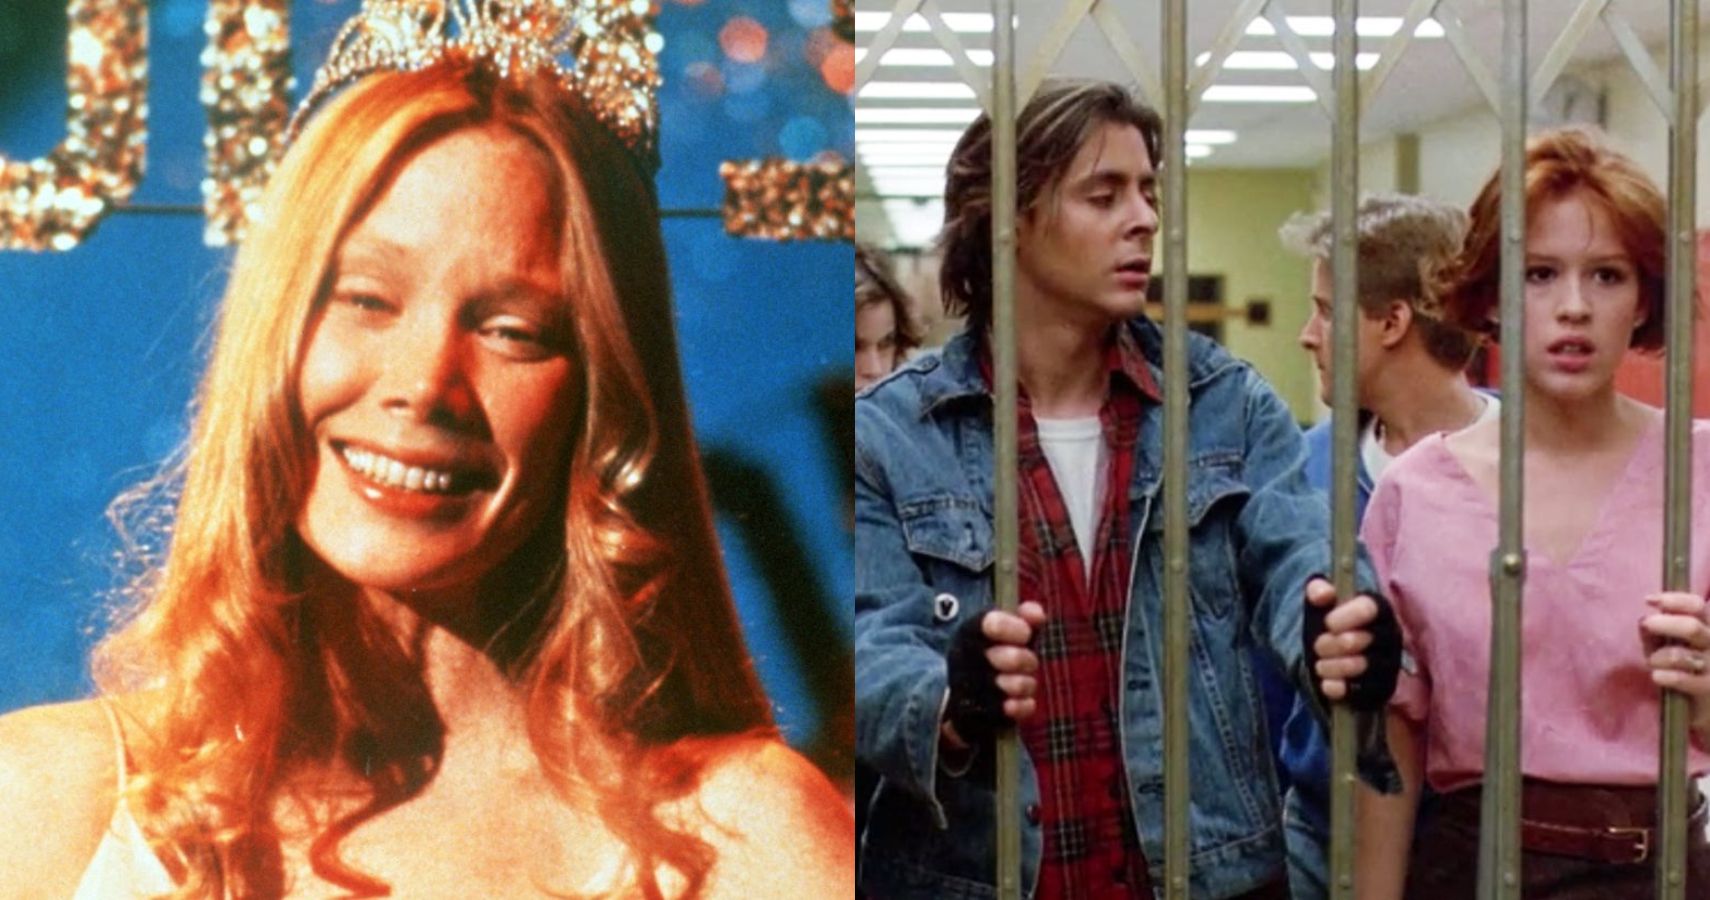 10 Back-To-School Movies To Watch This September